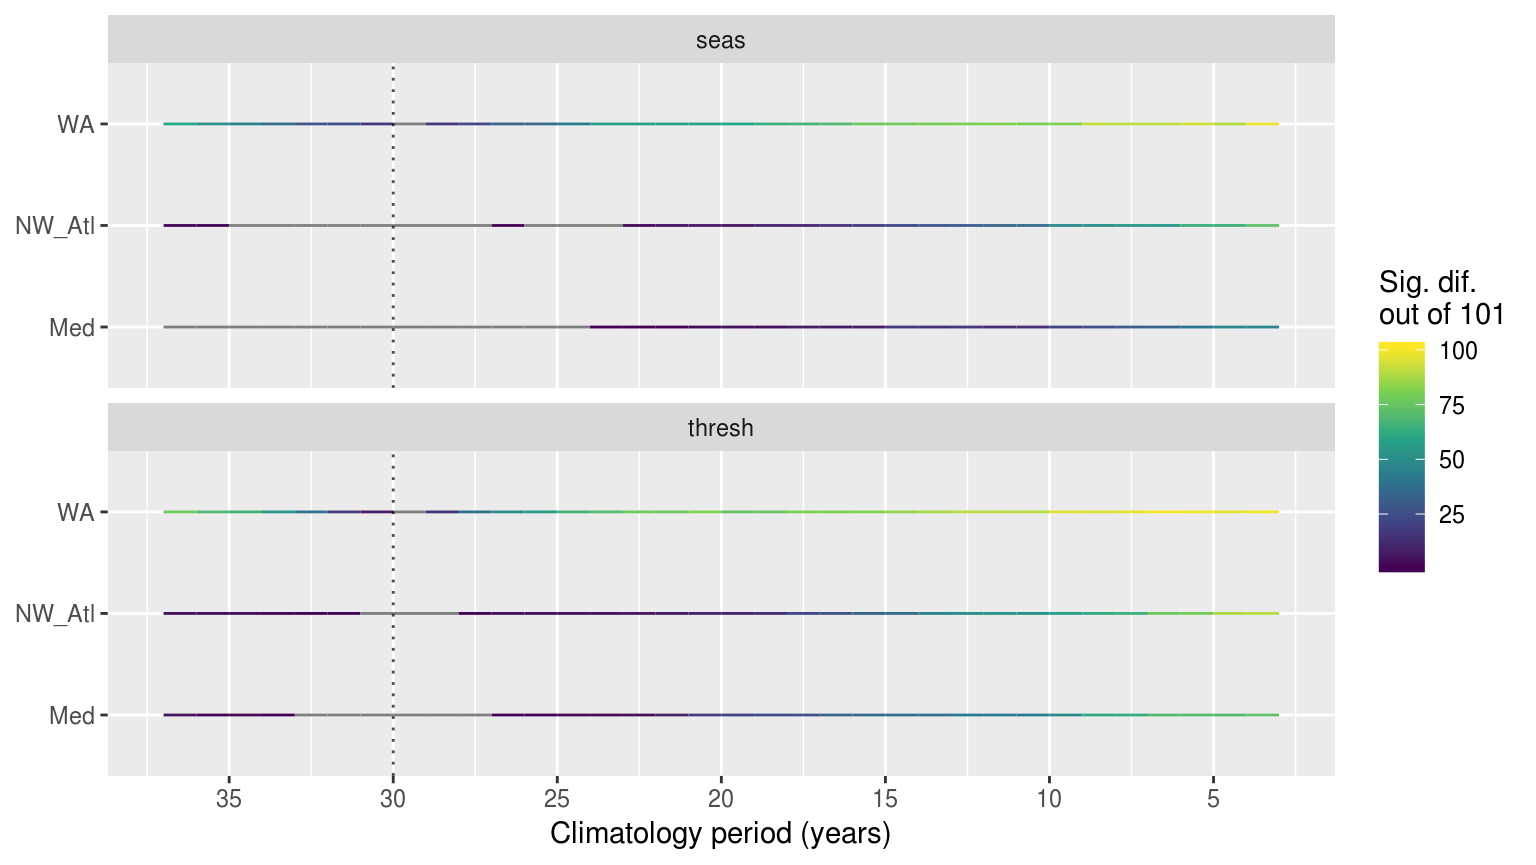 Time series showing the results of pairwise Kolmogorov-Smirnoff tests for the climatologies from the same time series at differing lengths. The colour of the line shows how many times out of 101 re-samples that the location along the y-axis was significantly different from the 30 year climatology. The dotted verticle line denotes the 30 year climatology mark, against which all othe climatologies were compared. If no re-samplings were significantly different this is shown with a grey line.